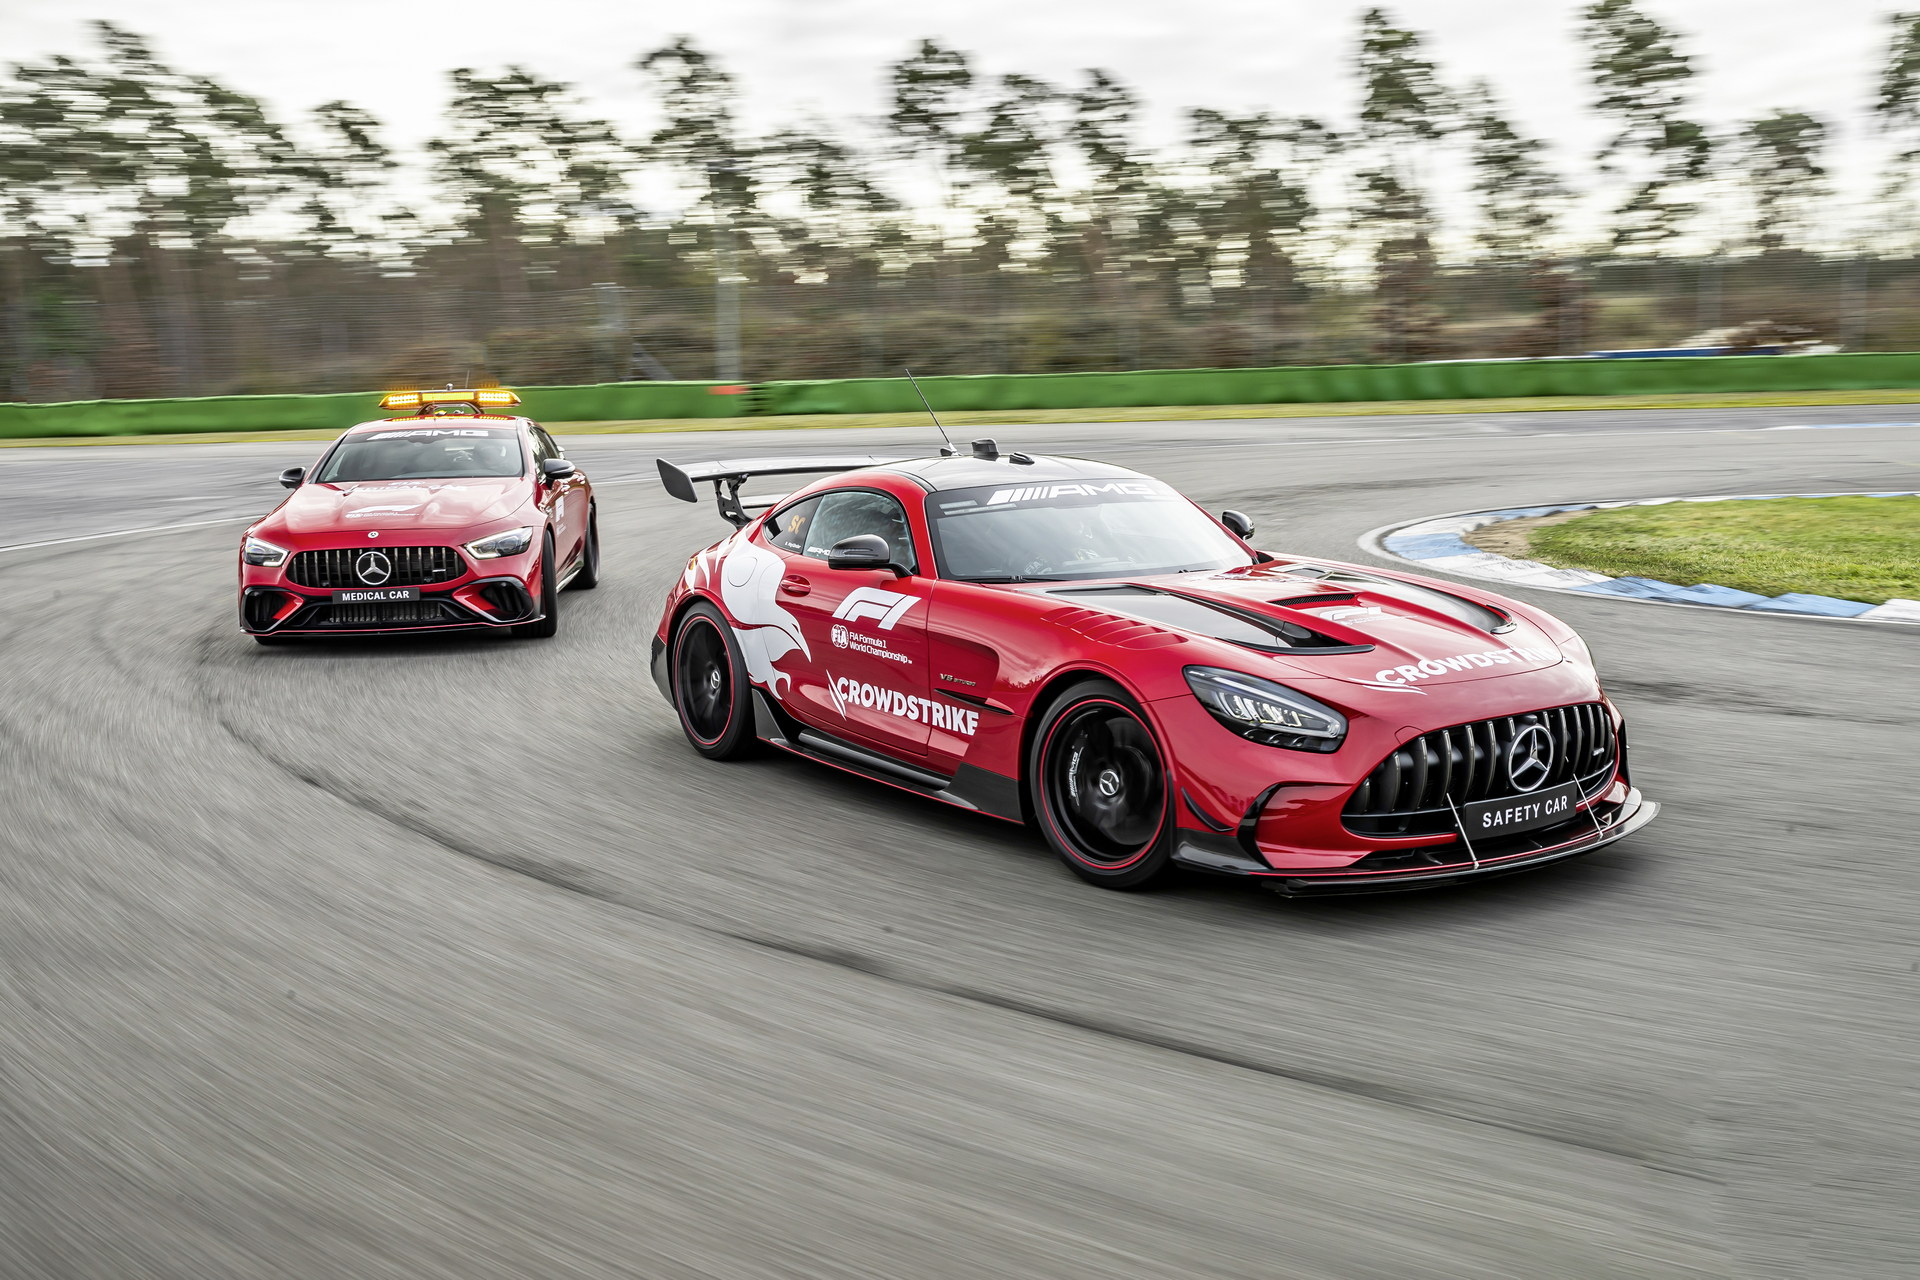 2022 Mercedes-AMG GT 63 S F1 Medical Car and Mercedes-AMG GT Black Series F1 Safety Car Wallpapers #16 of 36